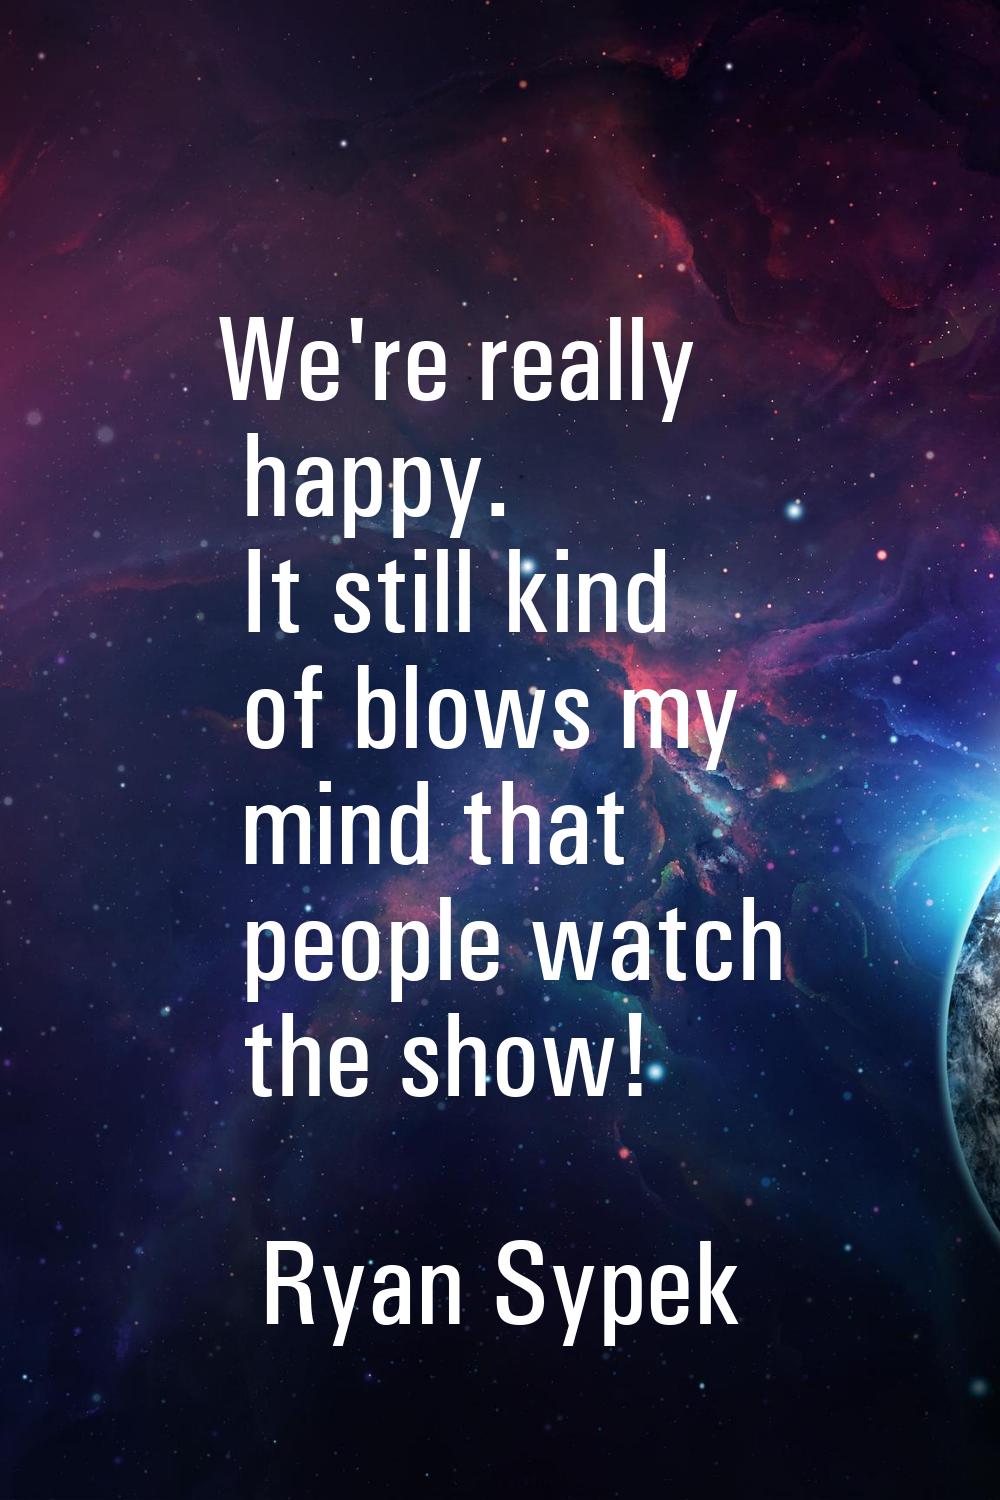 We're really happy. It still kind of blows my mind that people watch the show!